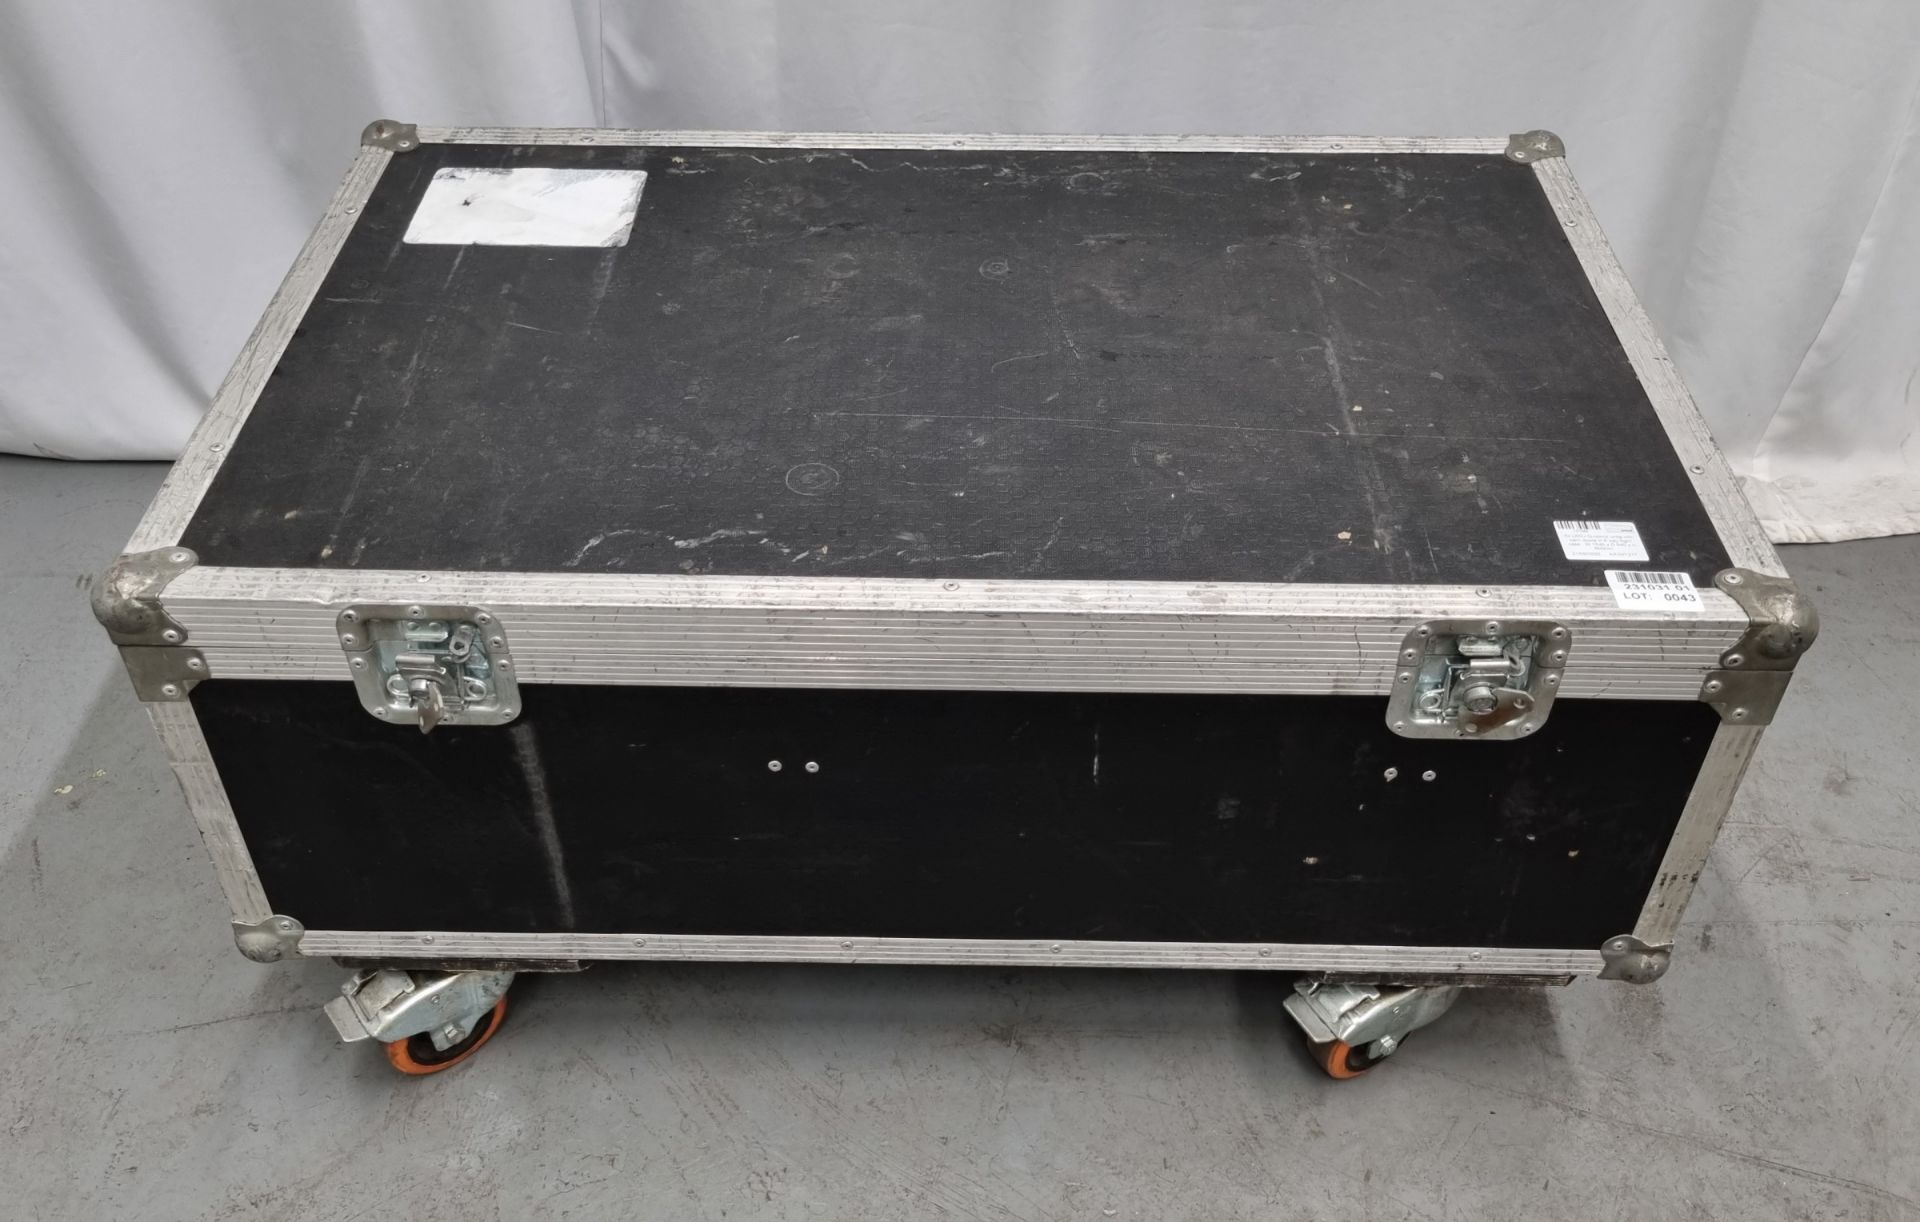 6x LEDJ Q-colour units with barn doors in 6 way flight case - W 1040 x D 640 x H 500mm - Image 8 of 8